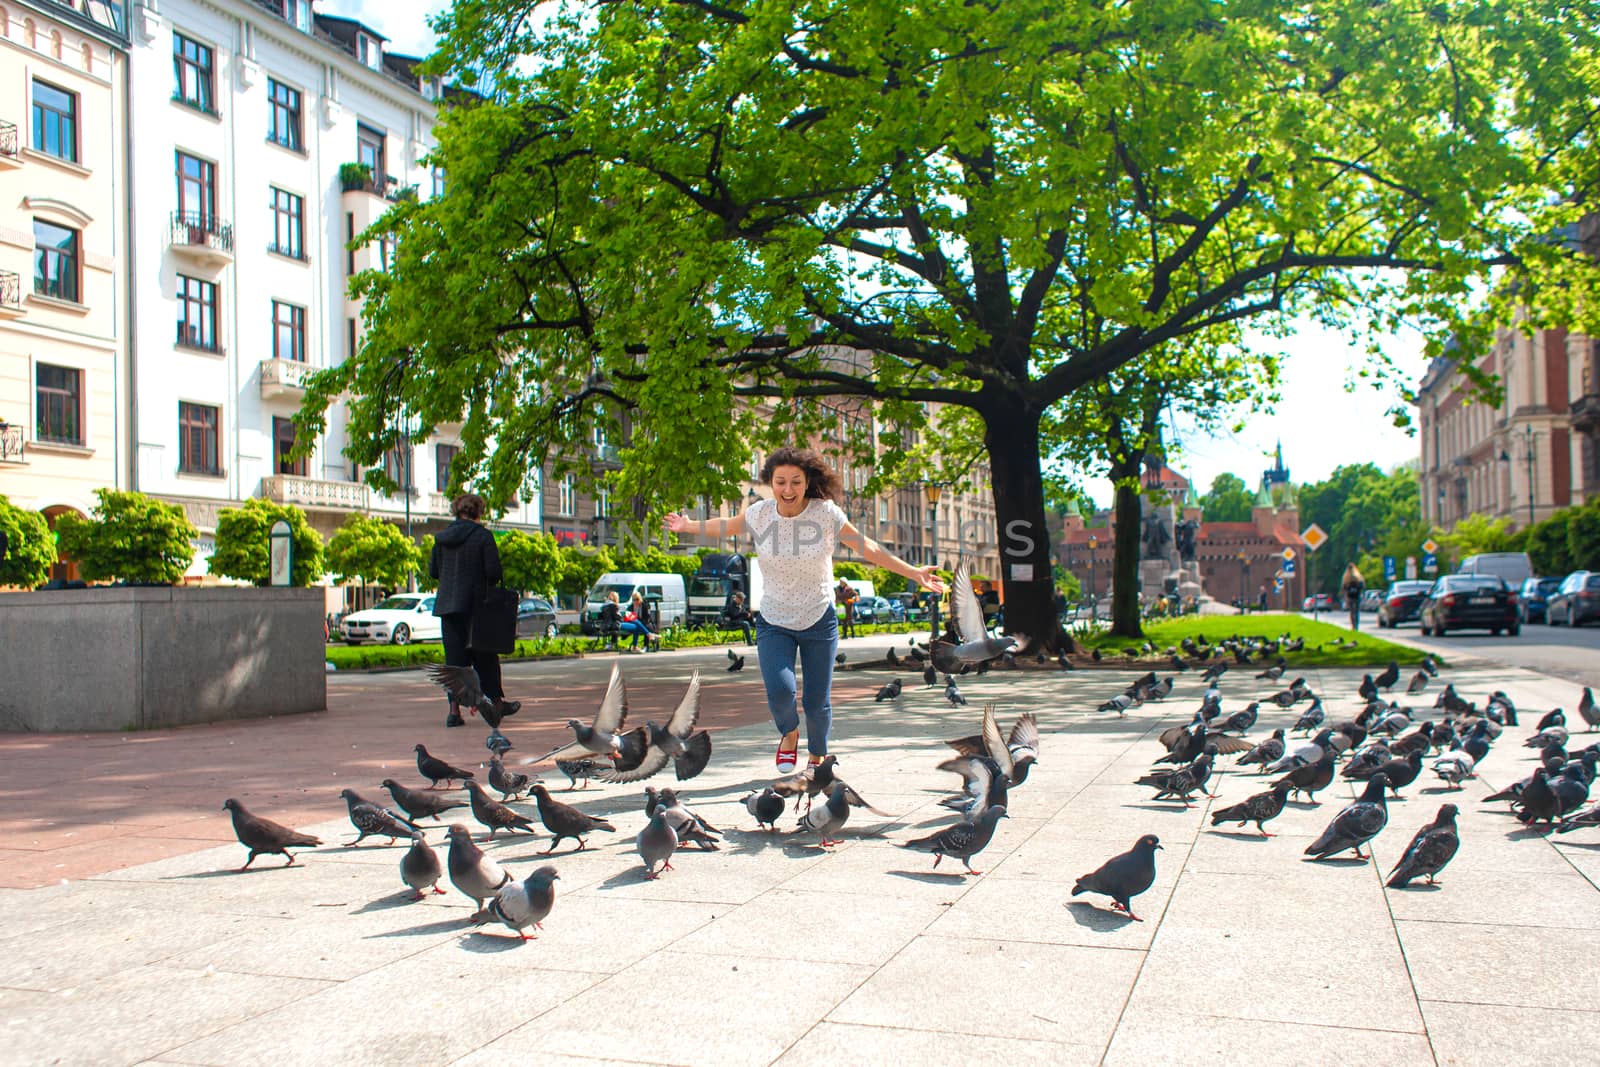 A girl scares a flock of pigeons in the city square.